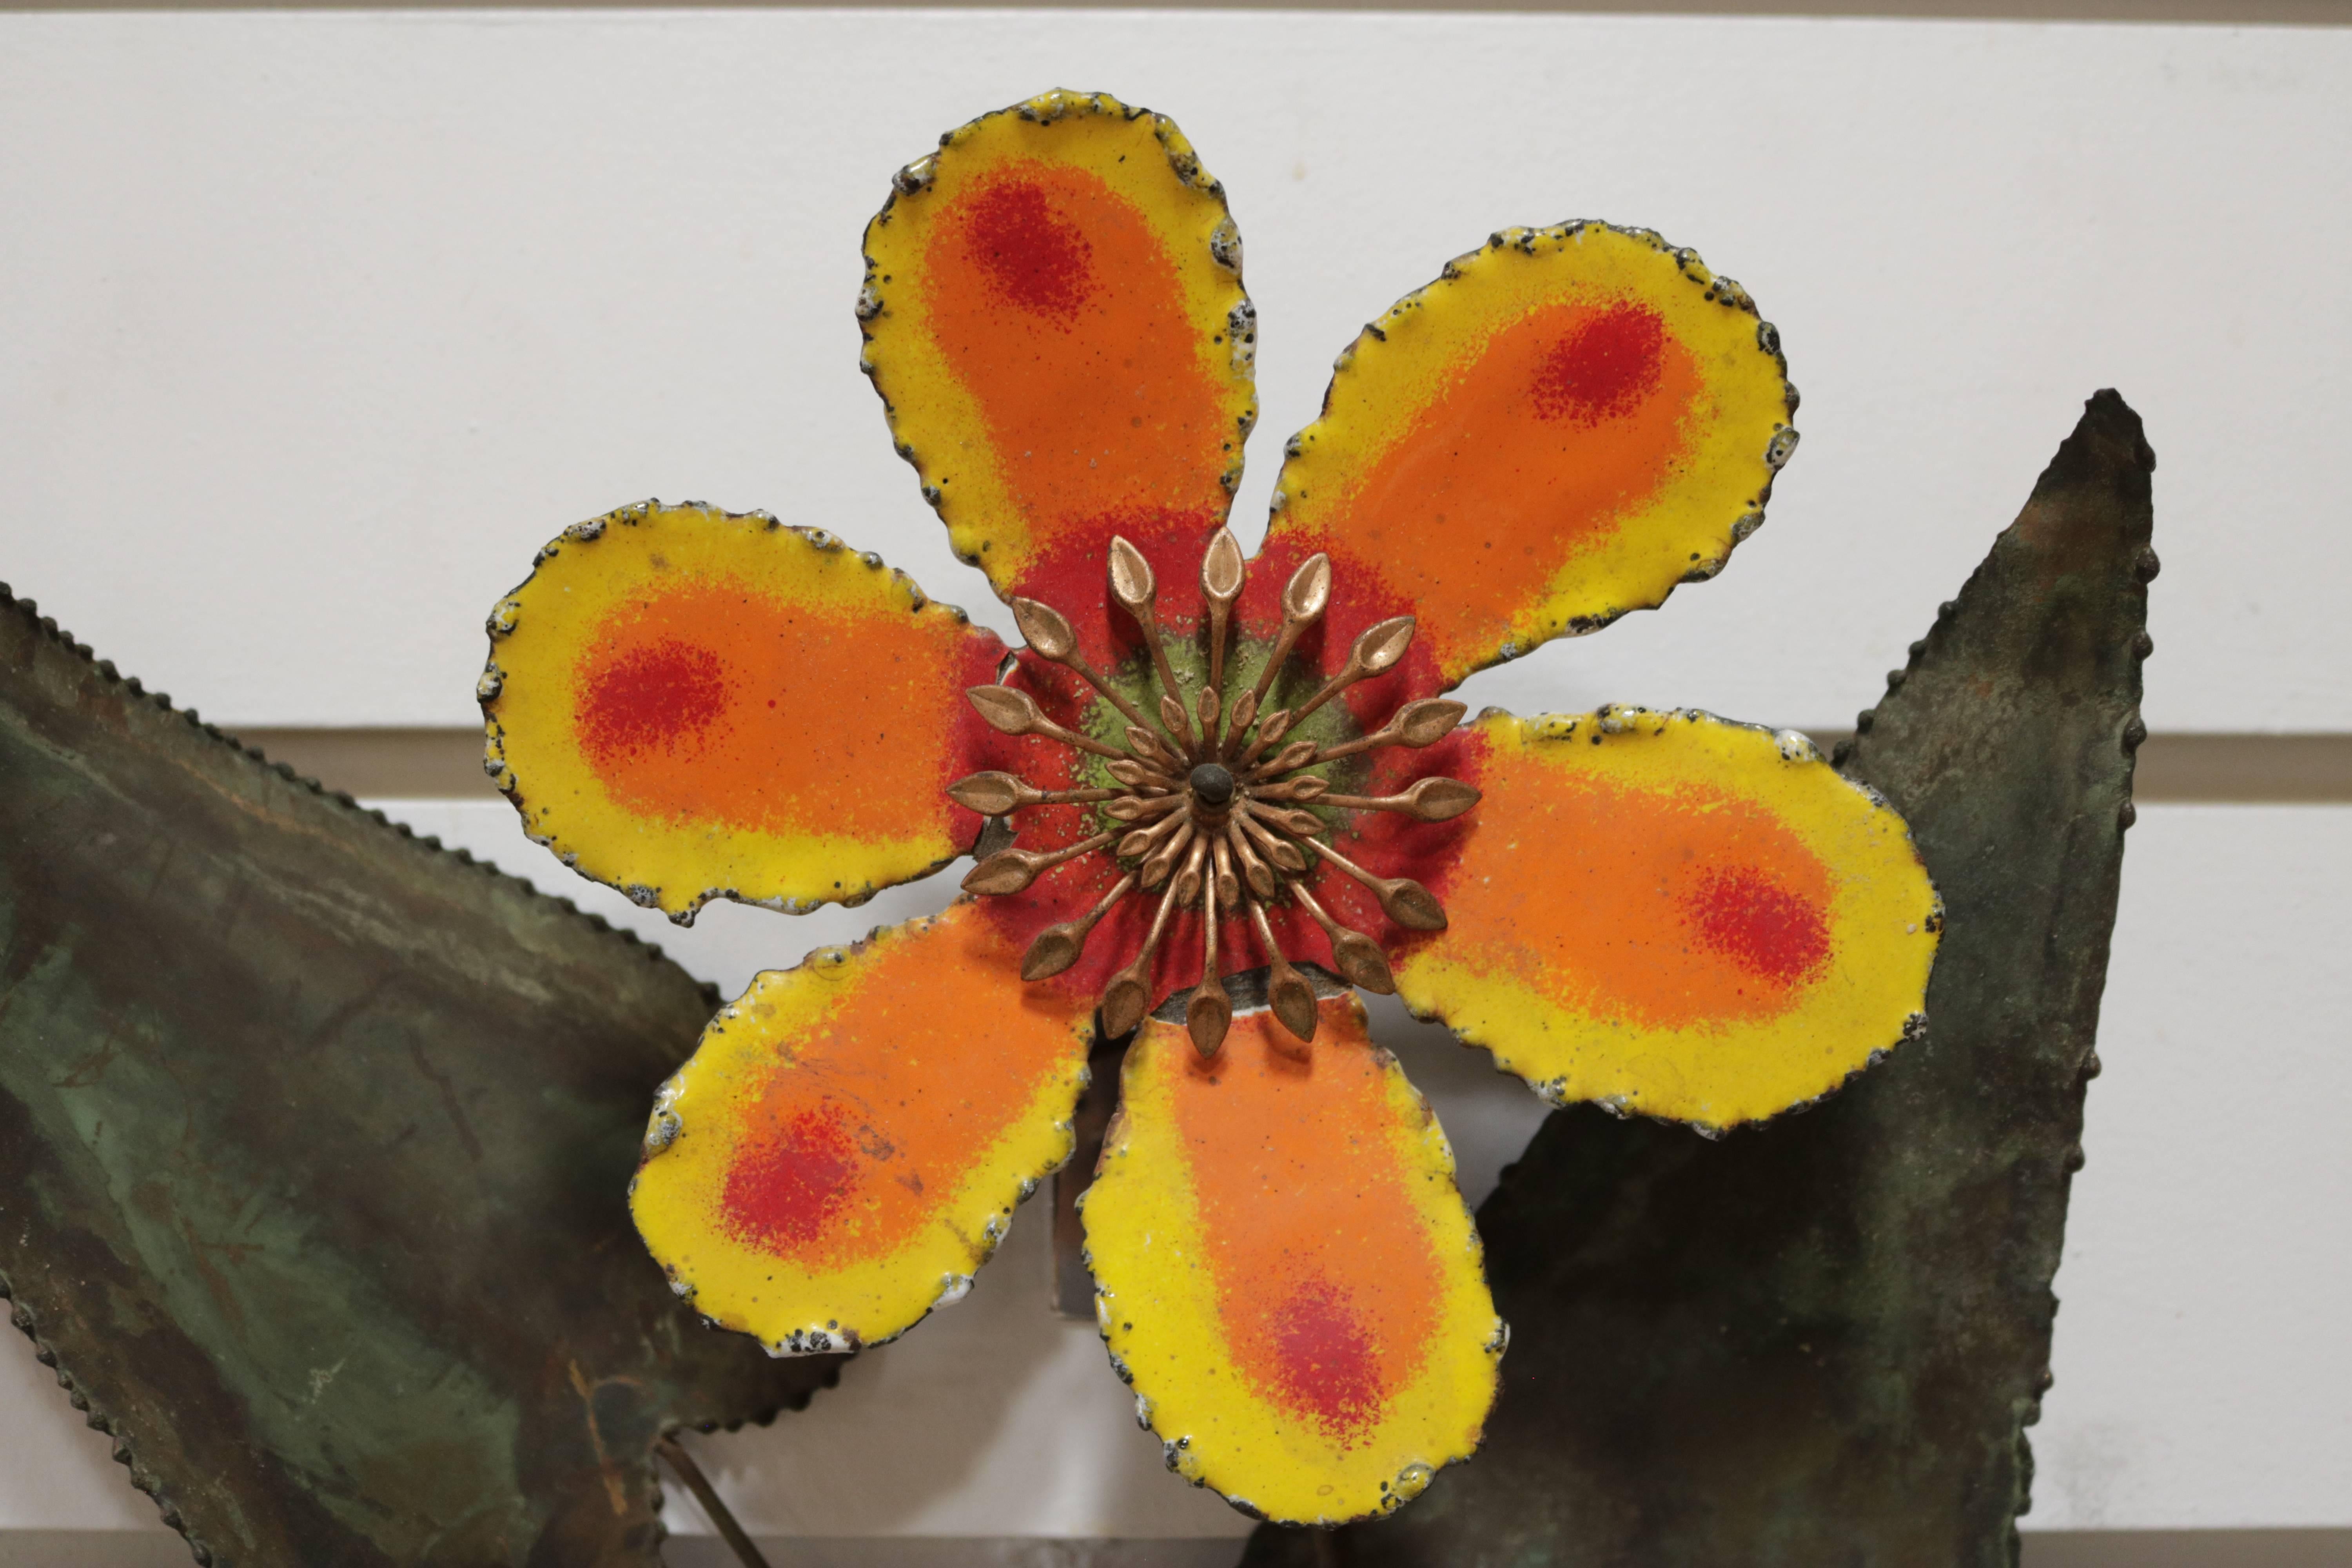 The flower is enameled in orange and yellow and the leaves are patinated in green.
It is signed C. Jere and dated 1967.
This is a perfect gift.